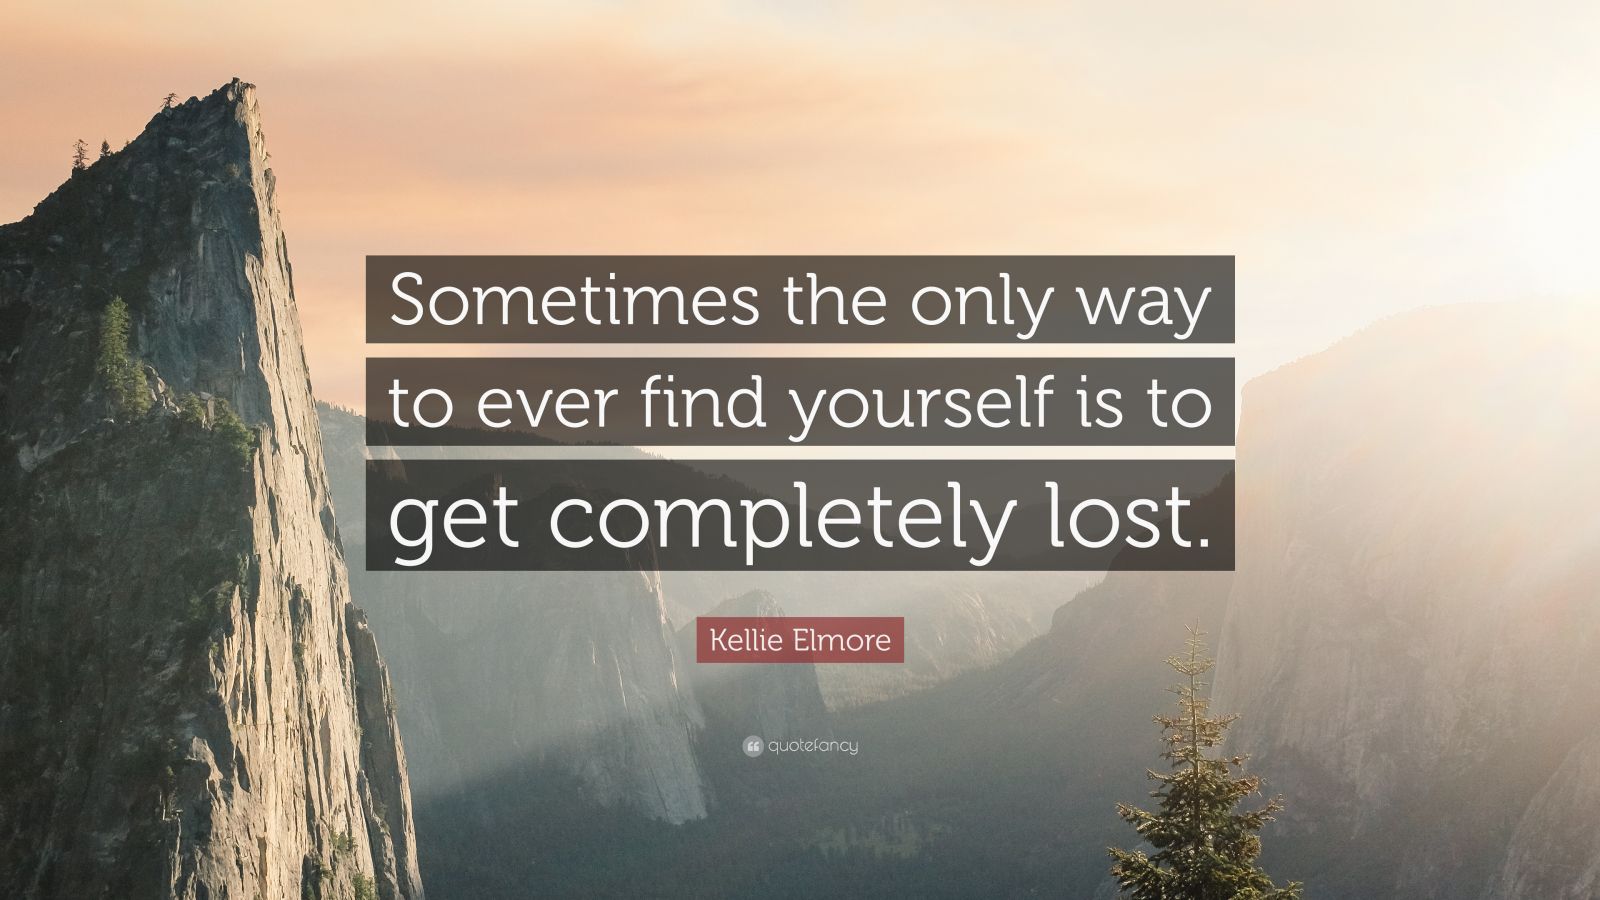 Kellie Elmore Quote: “Sometimes the only way to ever find yourself is ...